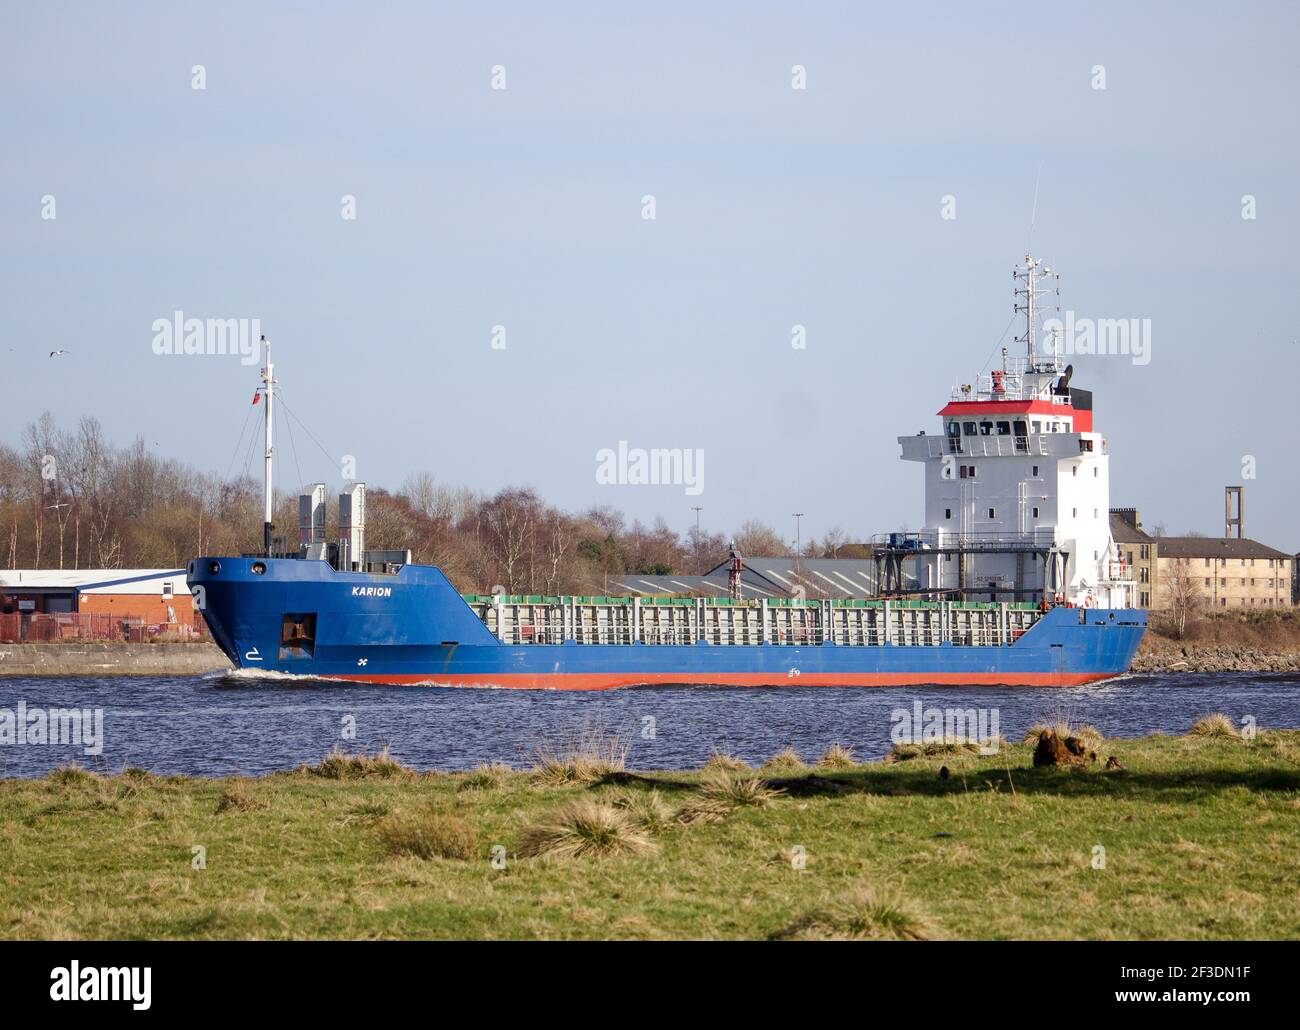 General Cargo Vessel Karion sul fiume Clyde, Glasgow Foto Stock